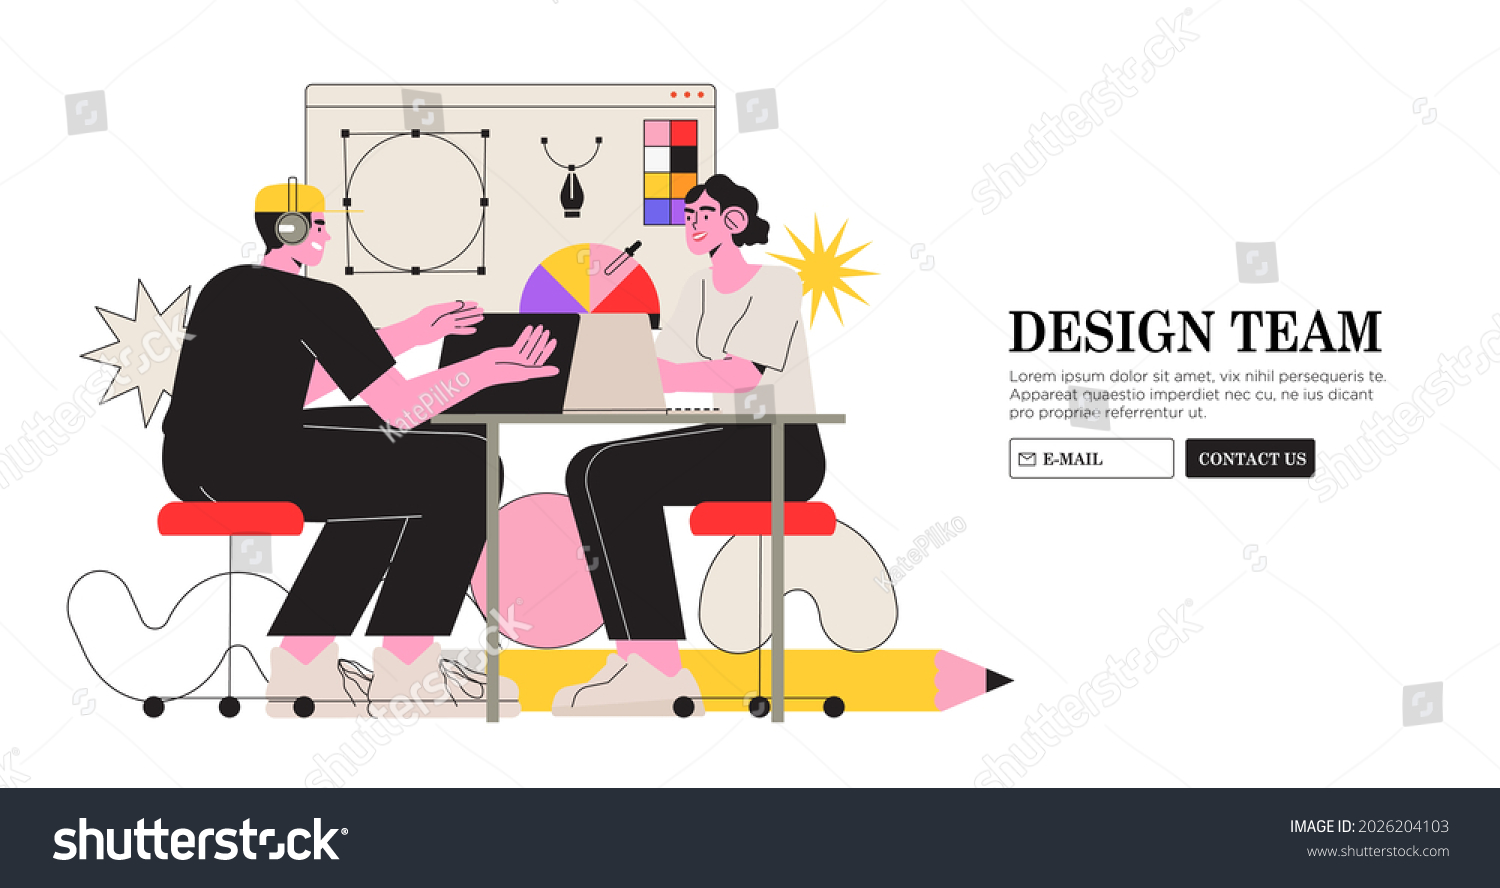 Web design studio or team working on laptops and discuss new project visualization. Creative or educational process banner, ad, landing page or poster for web design studio job or career and courses. #2026204103